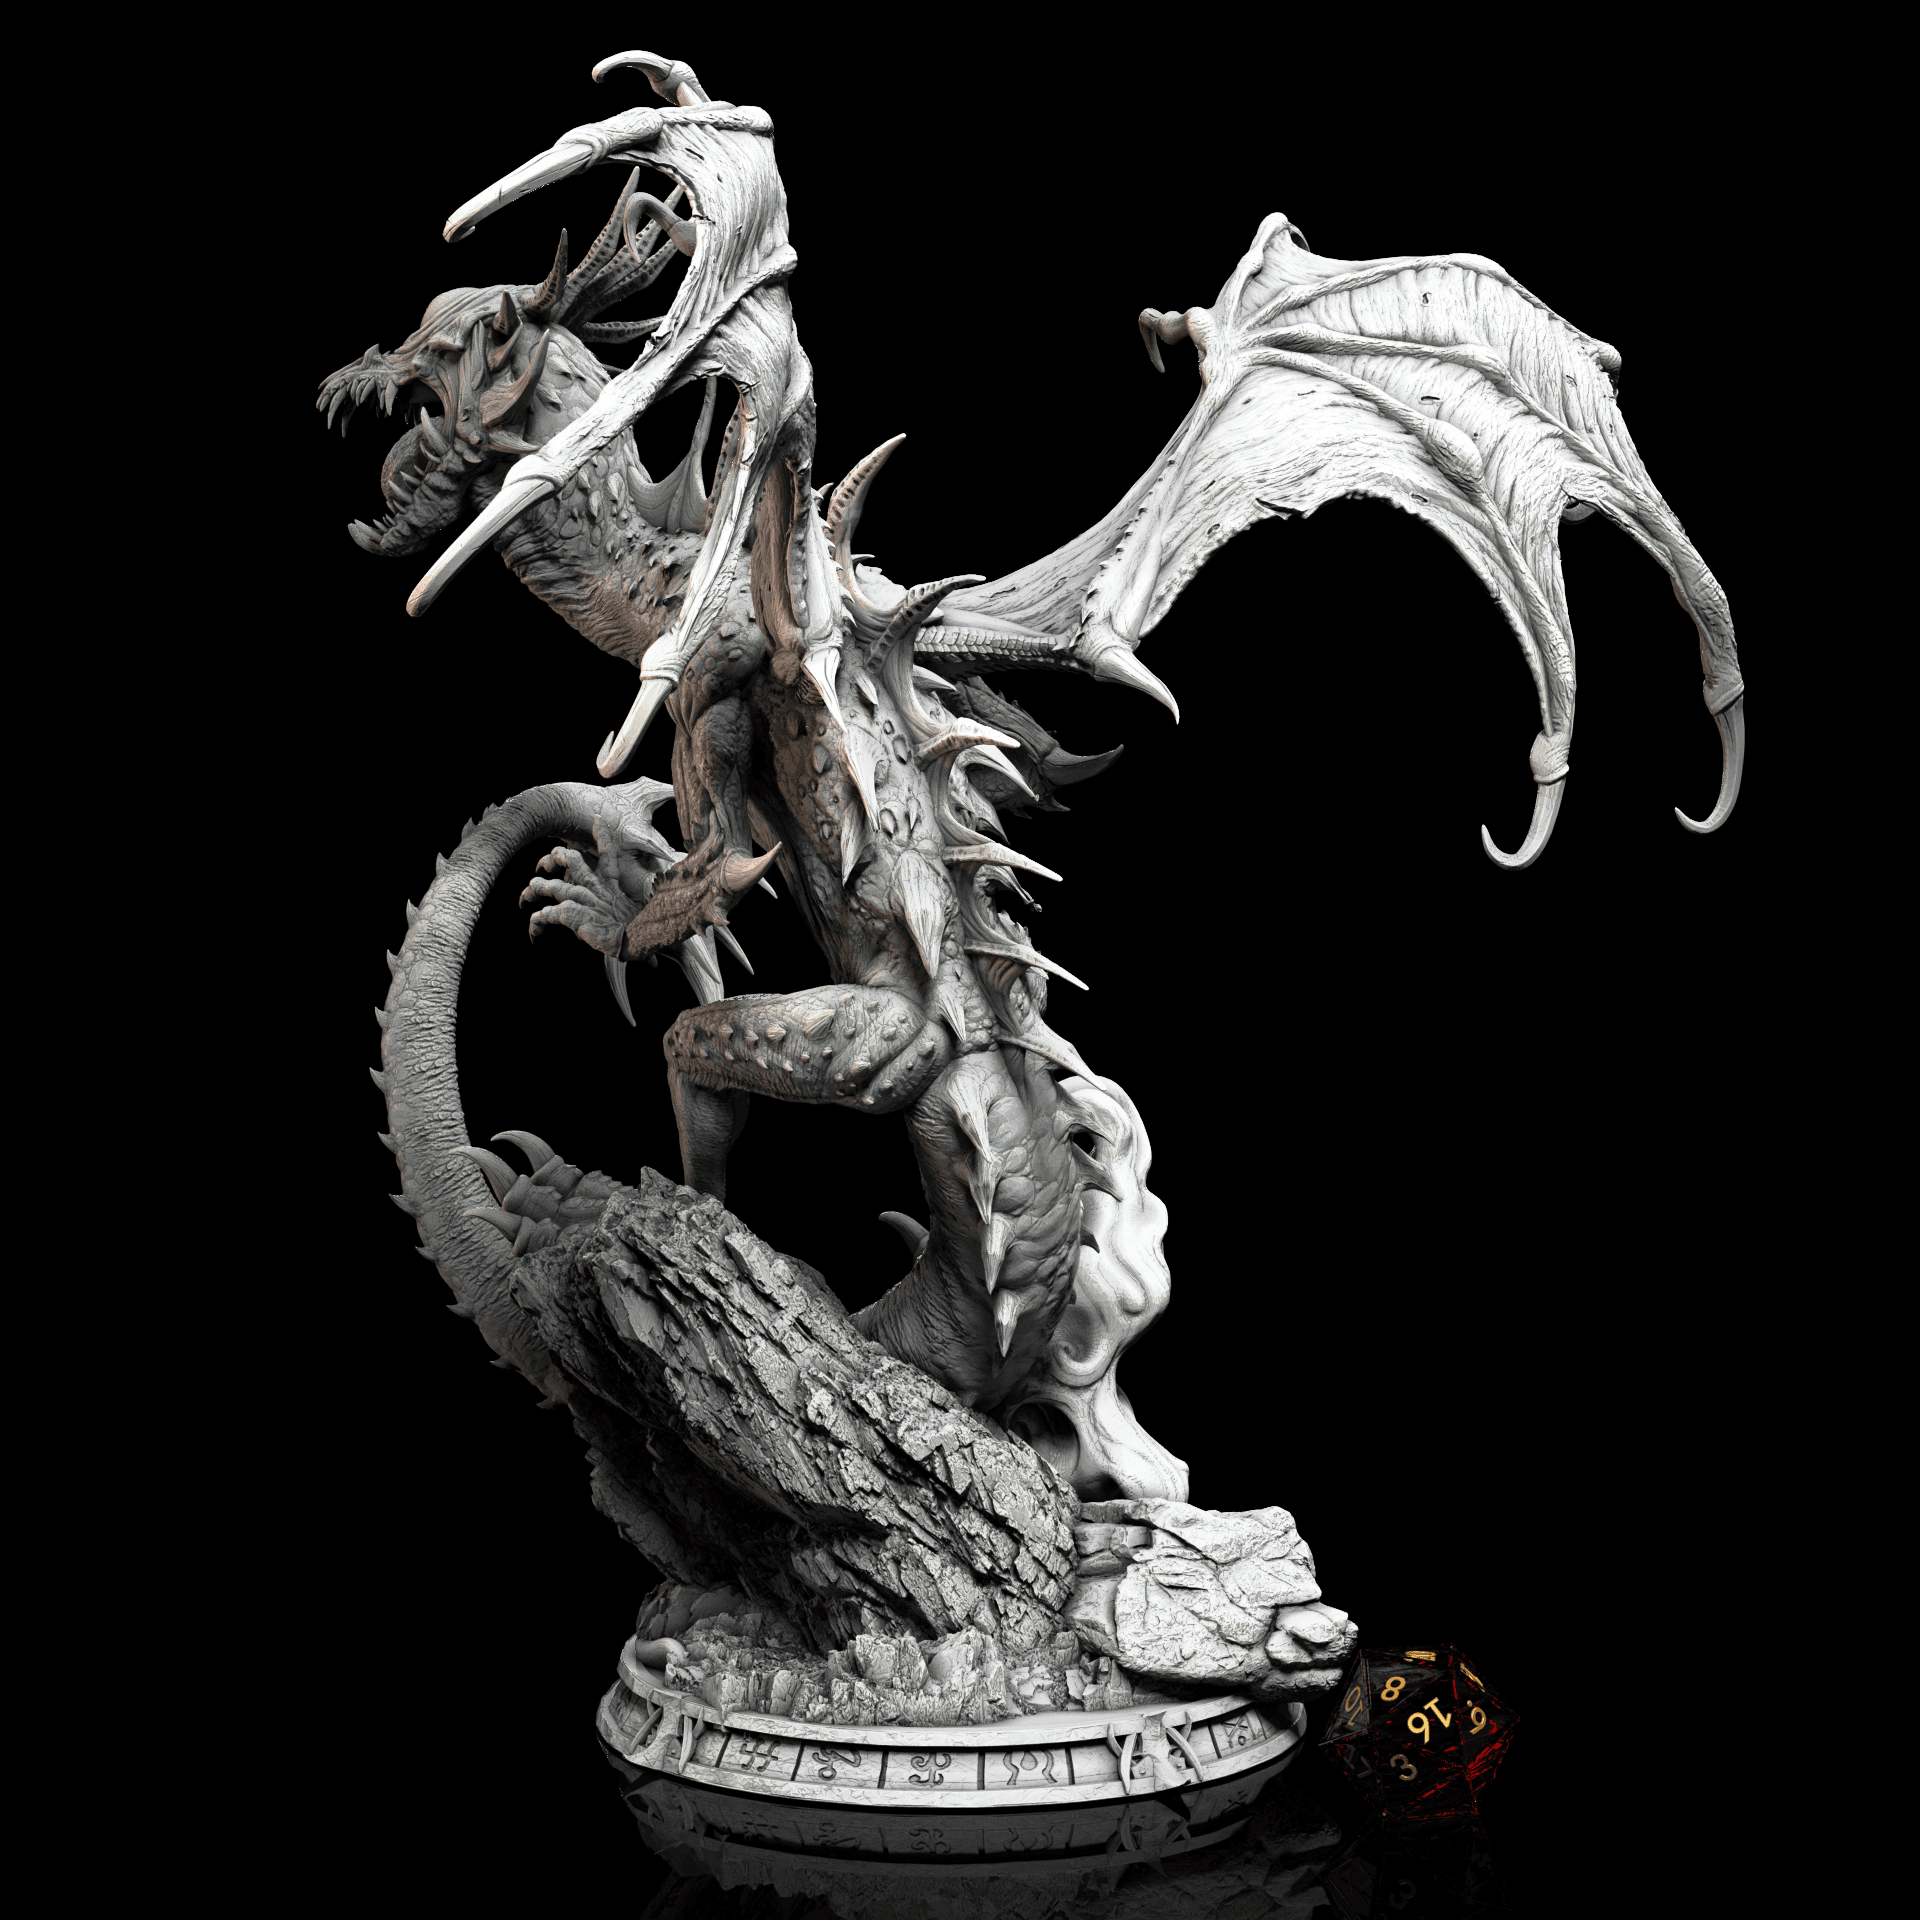 The Nothic Dragon (80mm) 3d model